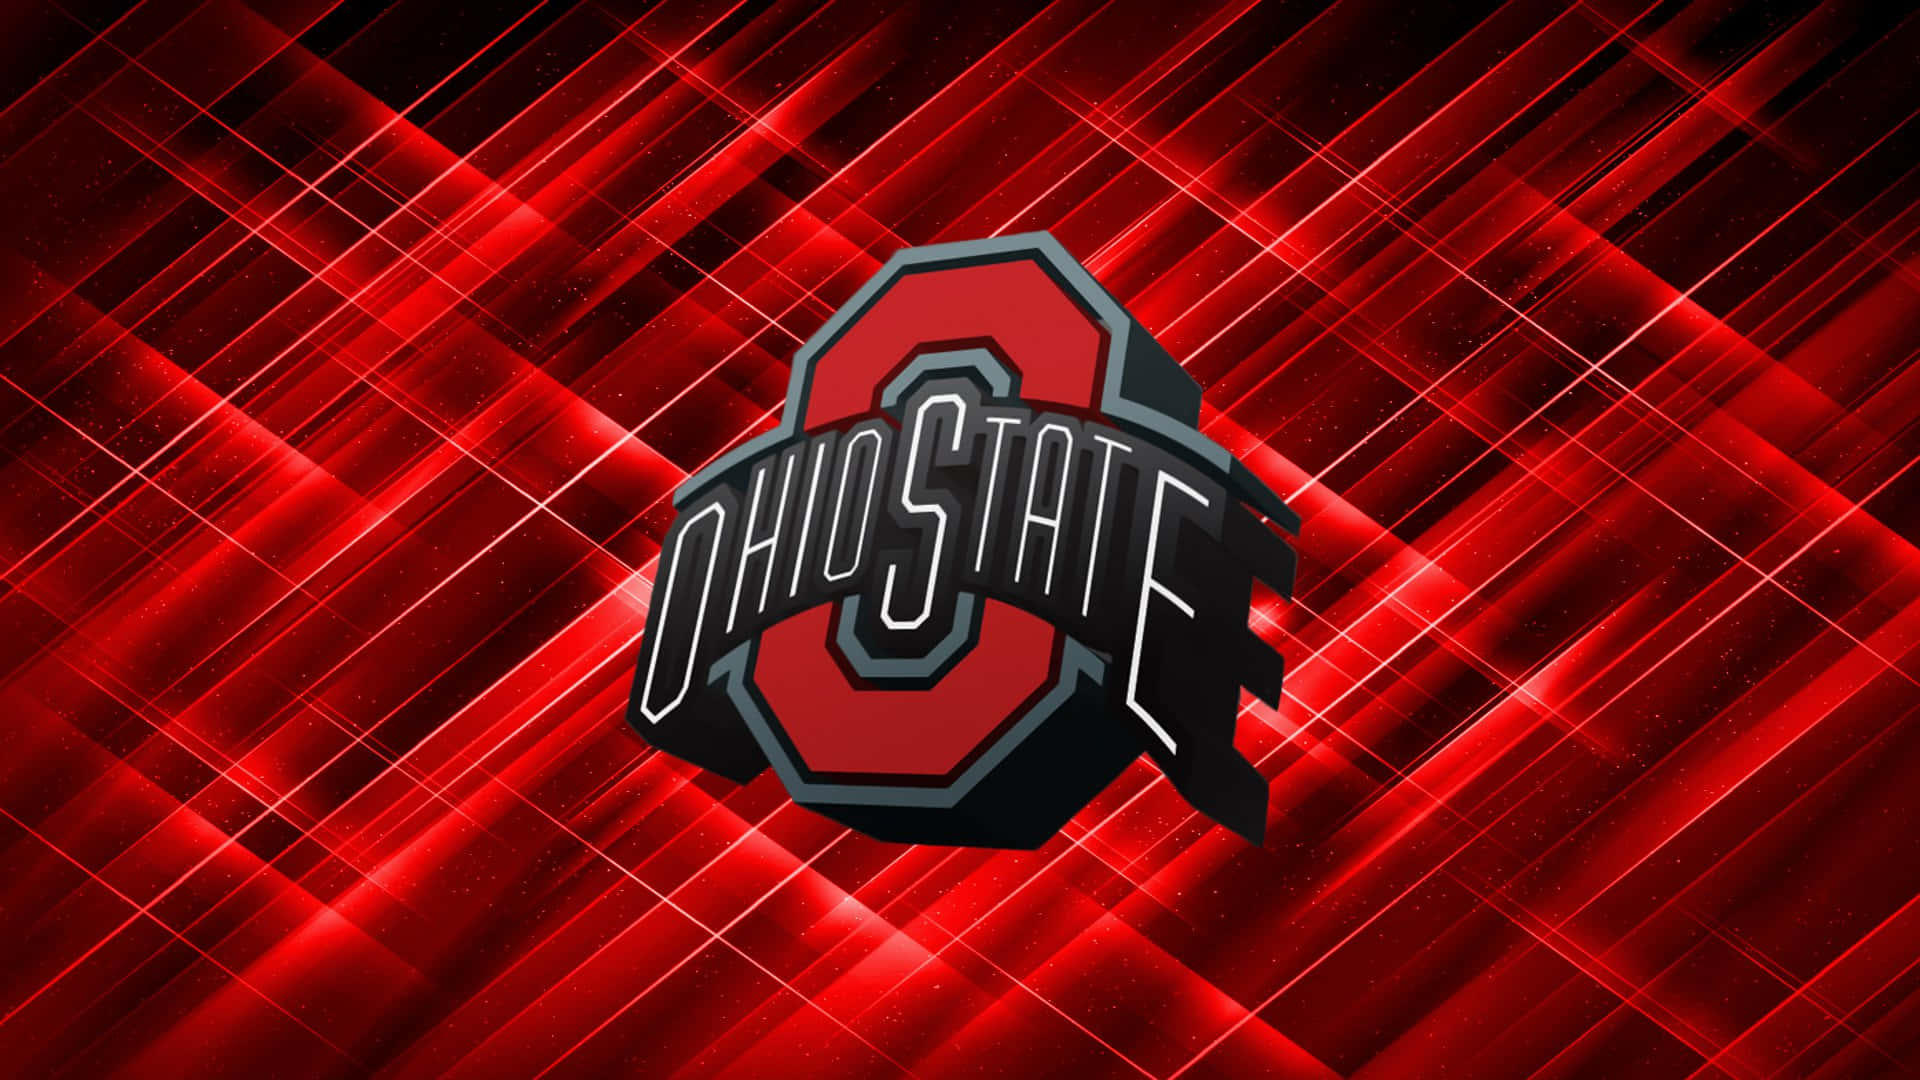 Celebrate the Ohio State University with this cool wall art Wallpaper